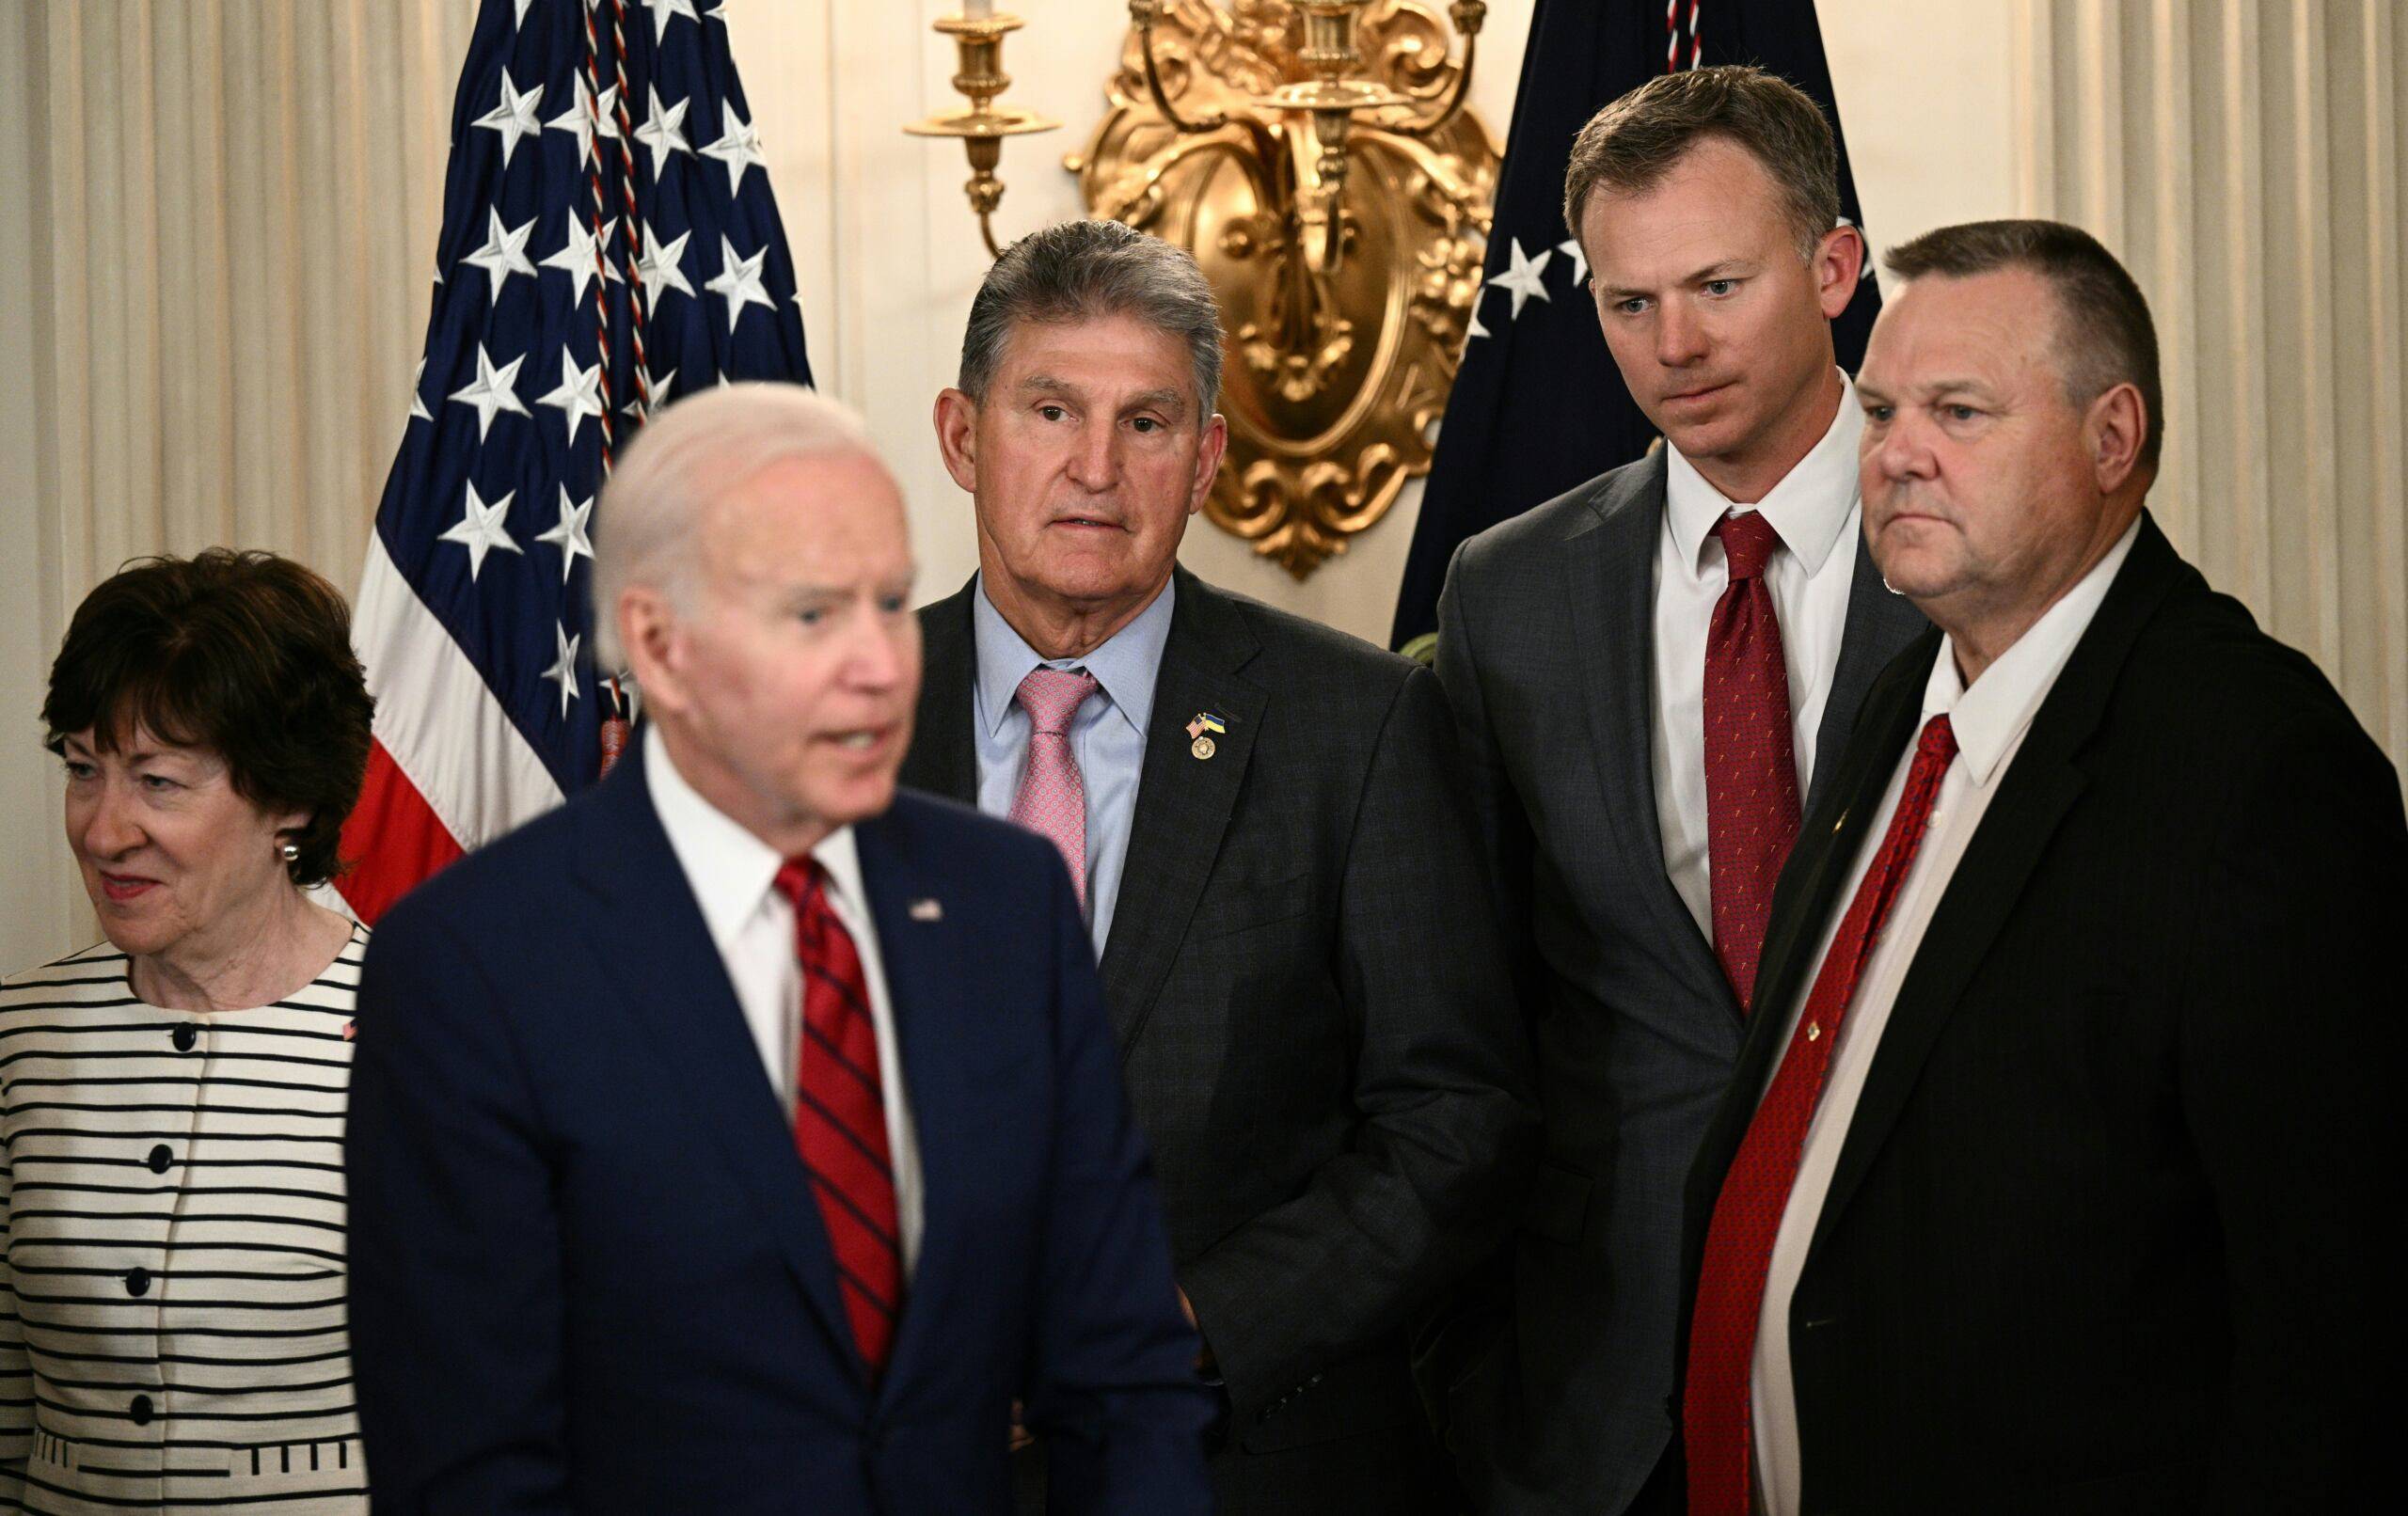 (L-R) Senator Susan Collins (R-ME), Senator Joe Manchin (D-WV), Representative Blake Moore (R-UT), Senator Jon Tester (D-MT) stand next to US President Joe Biden during a signing ceremony in the State Dining Room of the White House in Washington, DC, on June 7, 2022. - Biden signed nine bipartisan bills into law, meant to honor and improve care for veterans. (Photo by Brendan SMIALOWSKI / AFP)